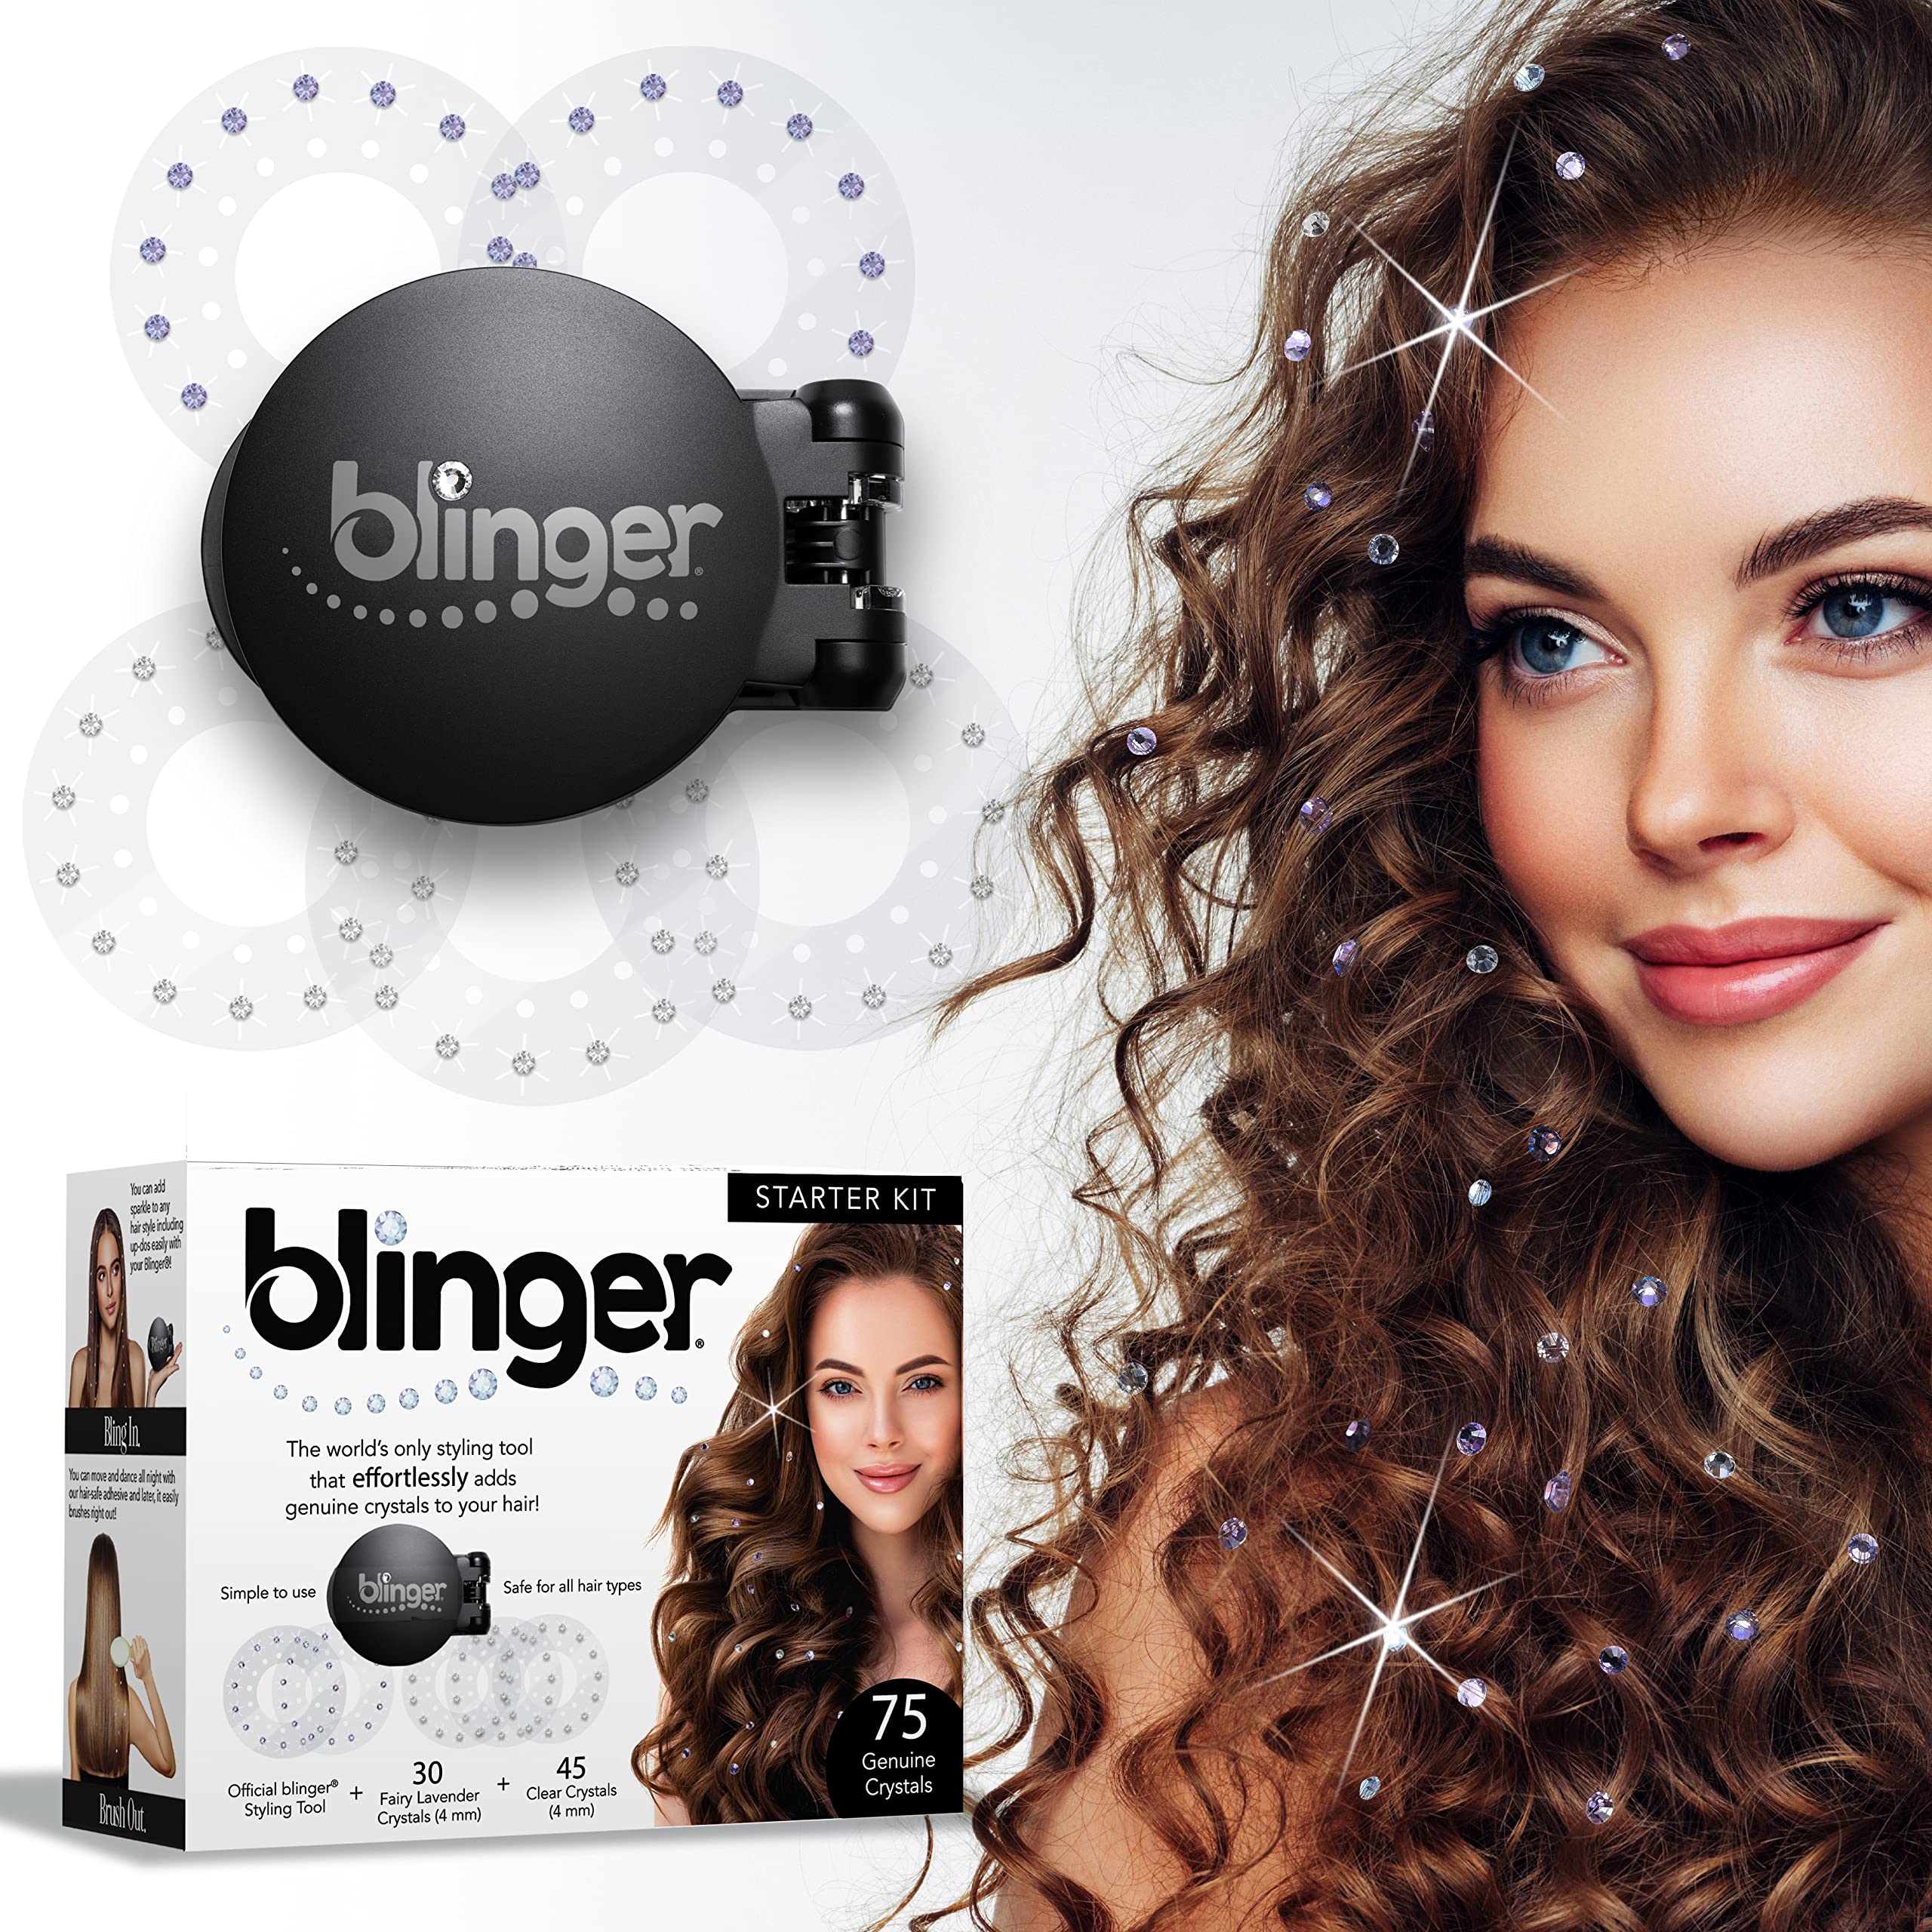 blinger Starter Kit | Women's Hair Styling Tool + 75 Precision-Cut Glass Crystals | Bling Hair in Seconds! Bedazzling Multi-Faceted Gems | Hair-Safe – Bling In Brush Out | By Blinger Kids Inventor